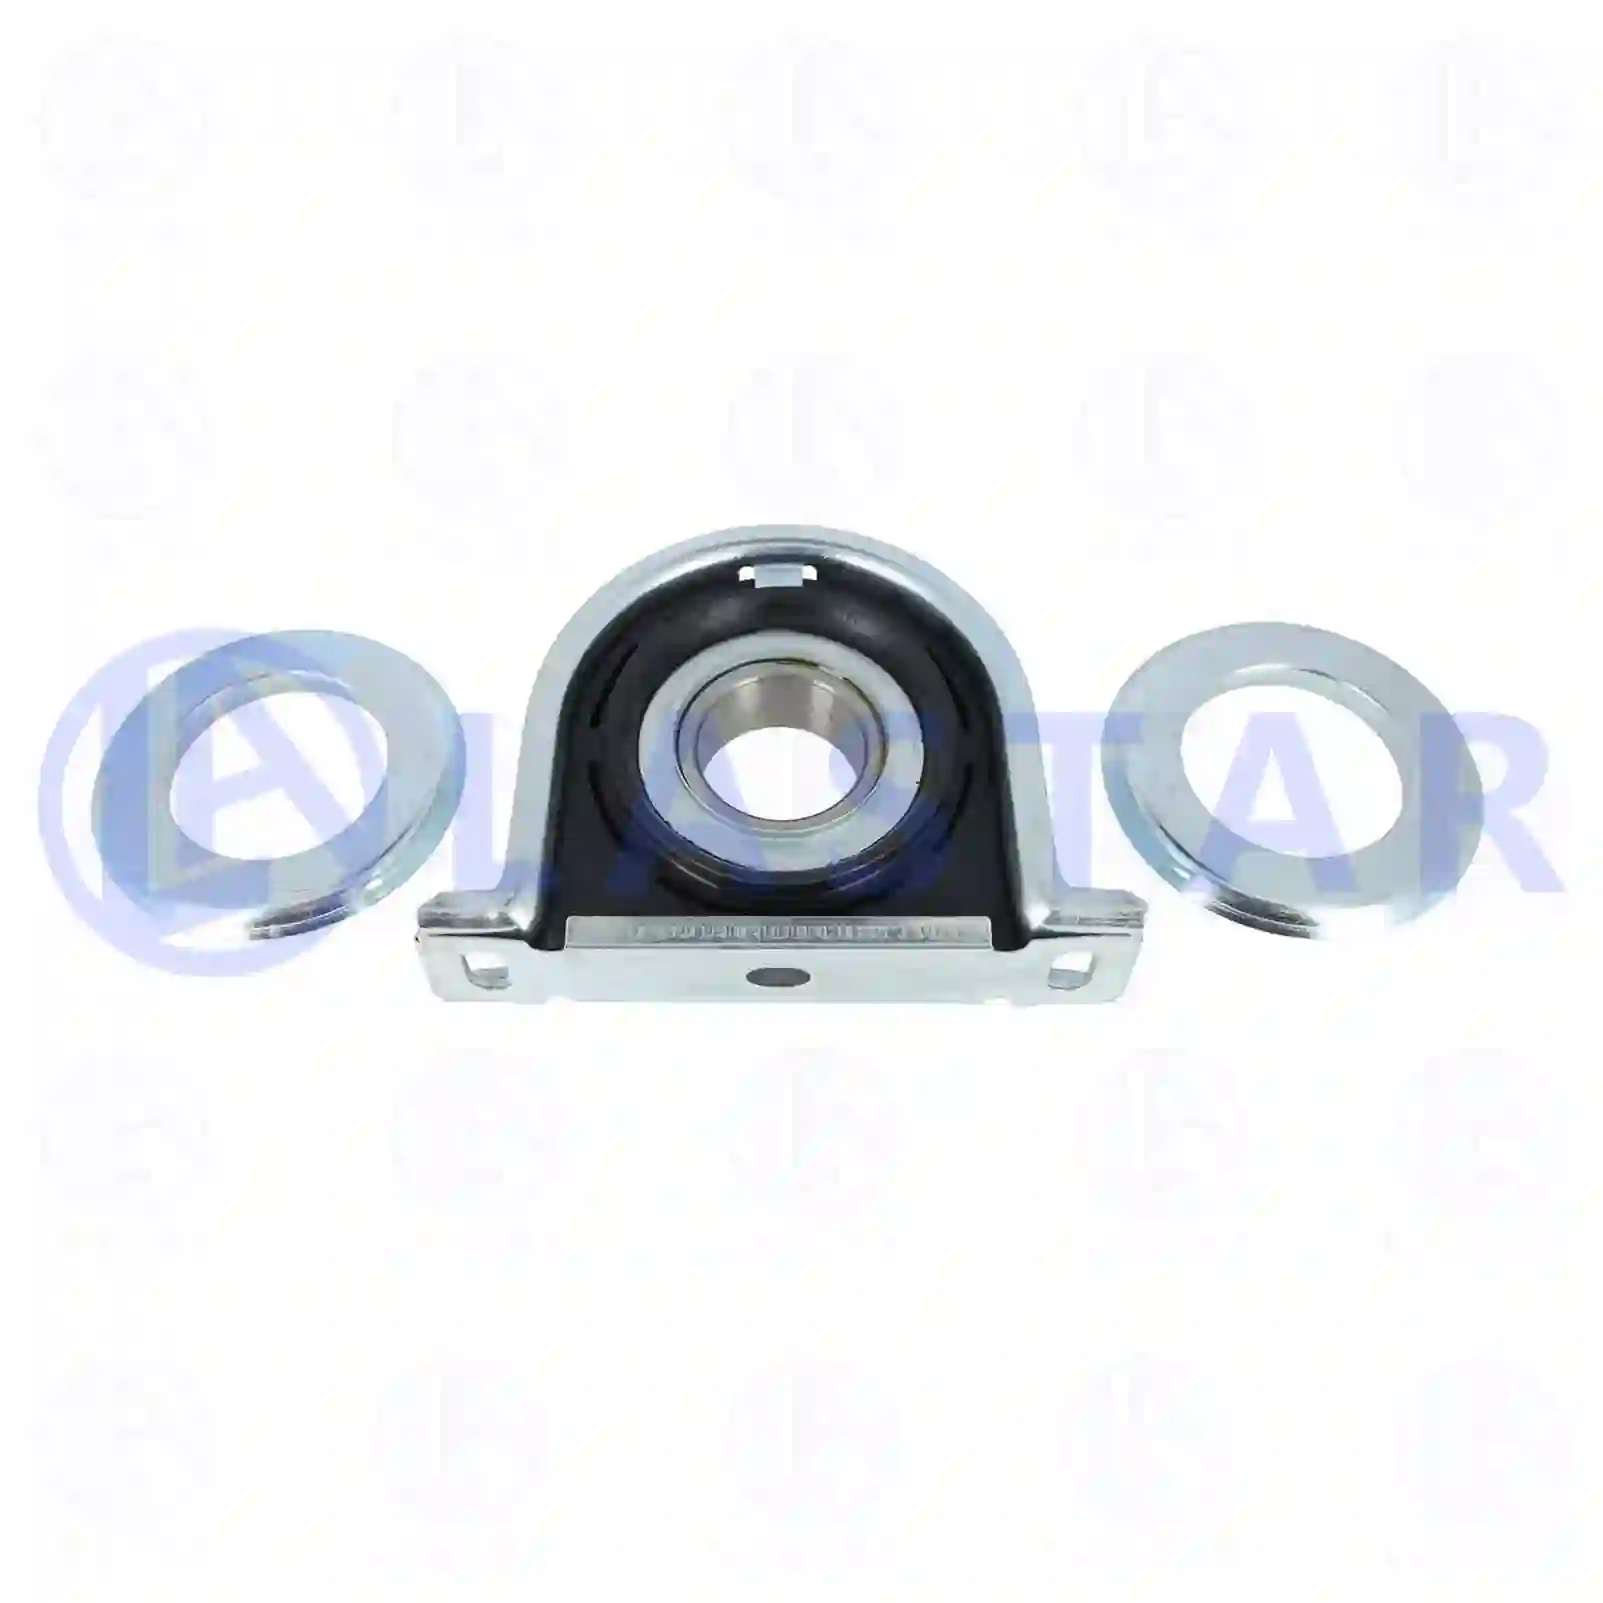 Support Bearing Center bearing, la no: 77734130 ,  oem no:5000819211, 7420876294, 20876294, ZG02496-0008 Lastar Spare Part | Truck Spare Parts, Auotomotive Spare Parts